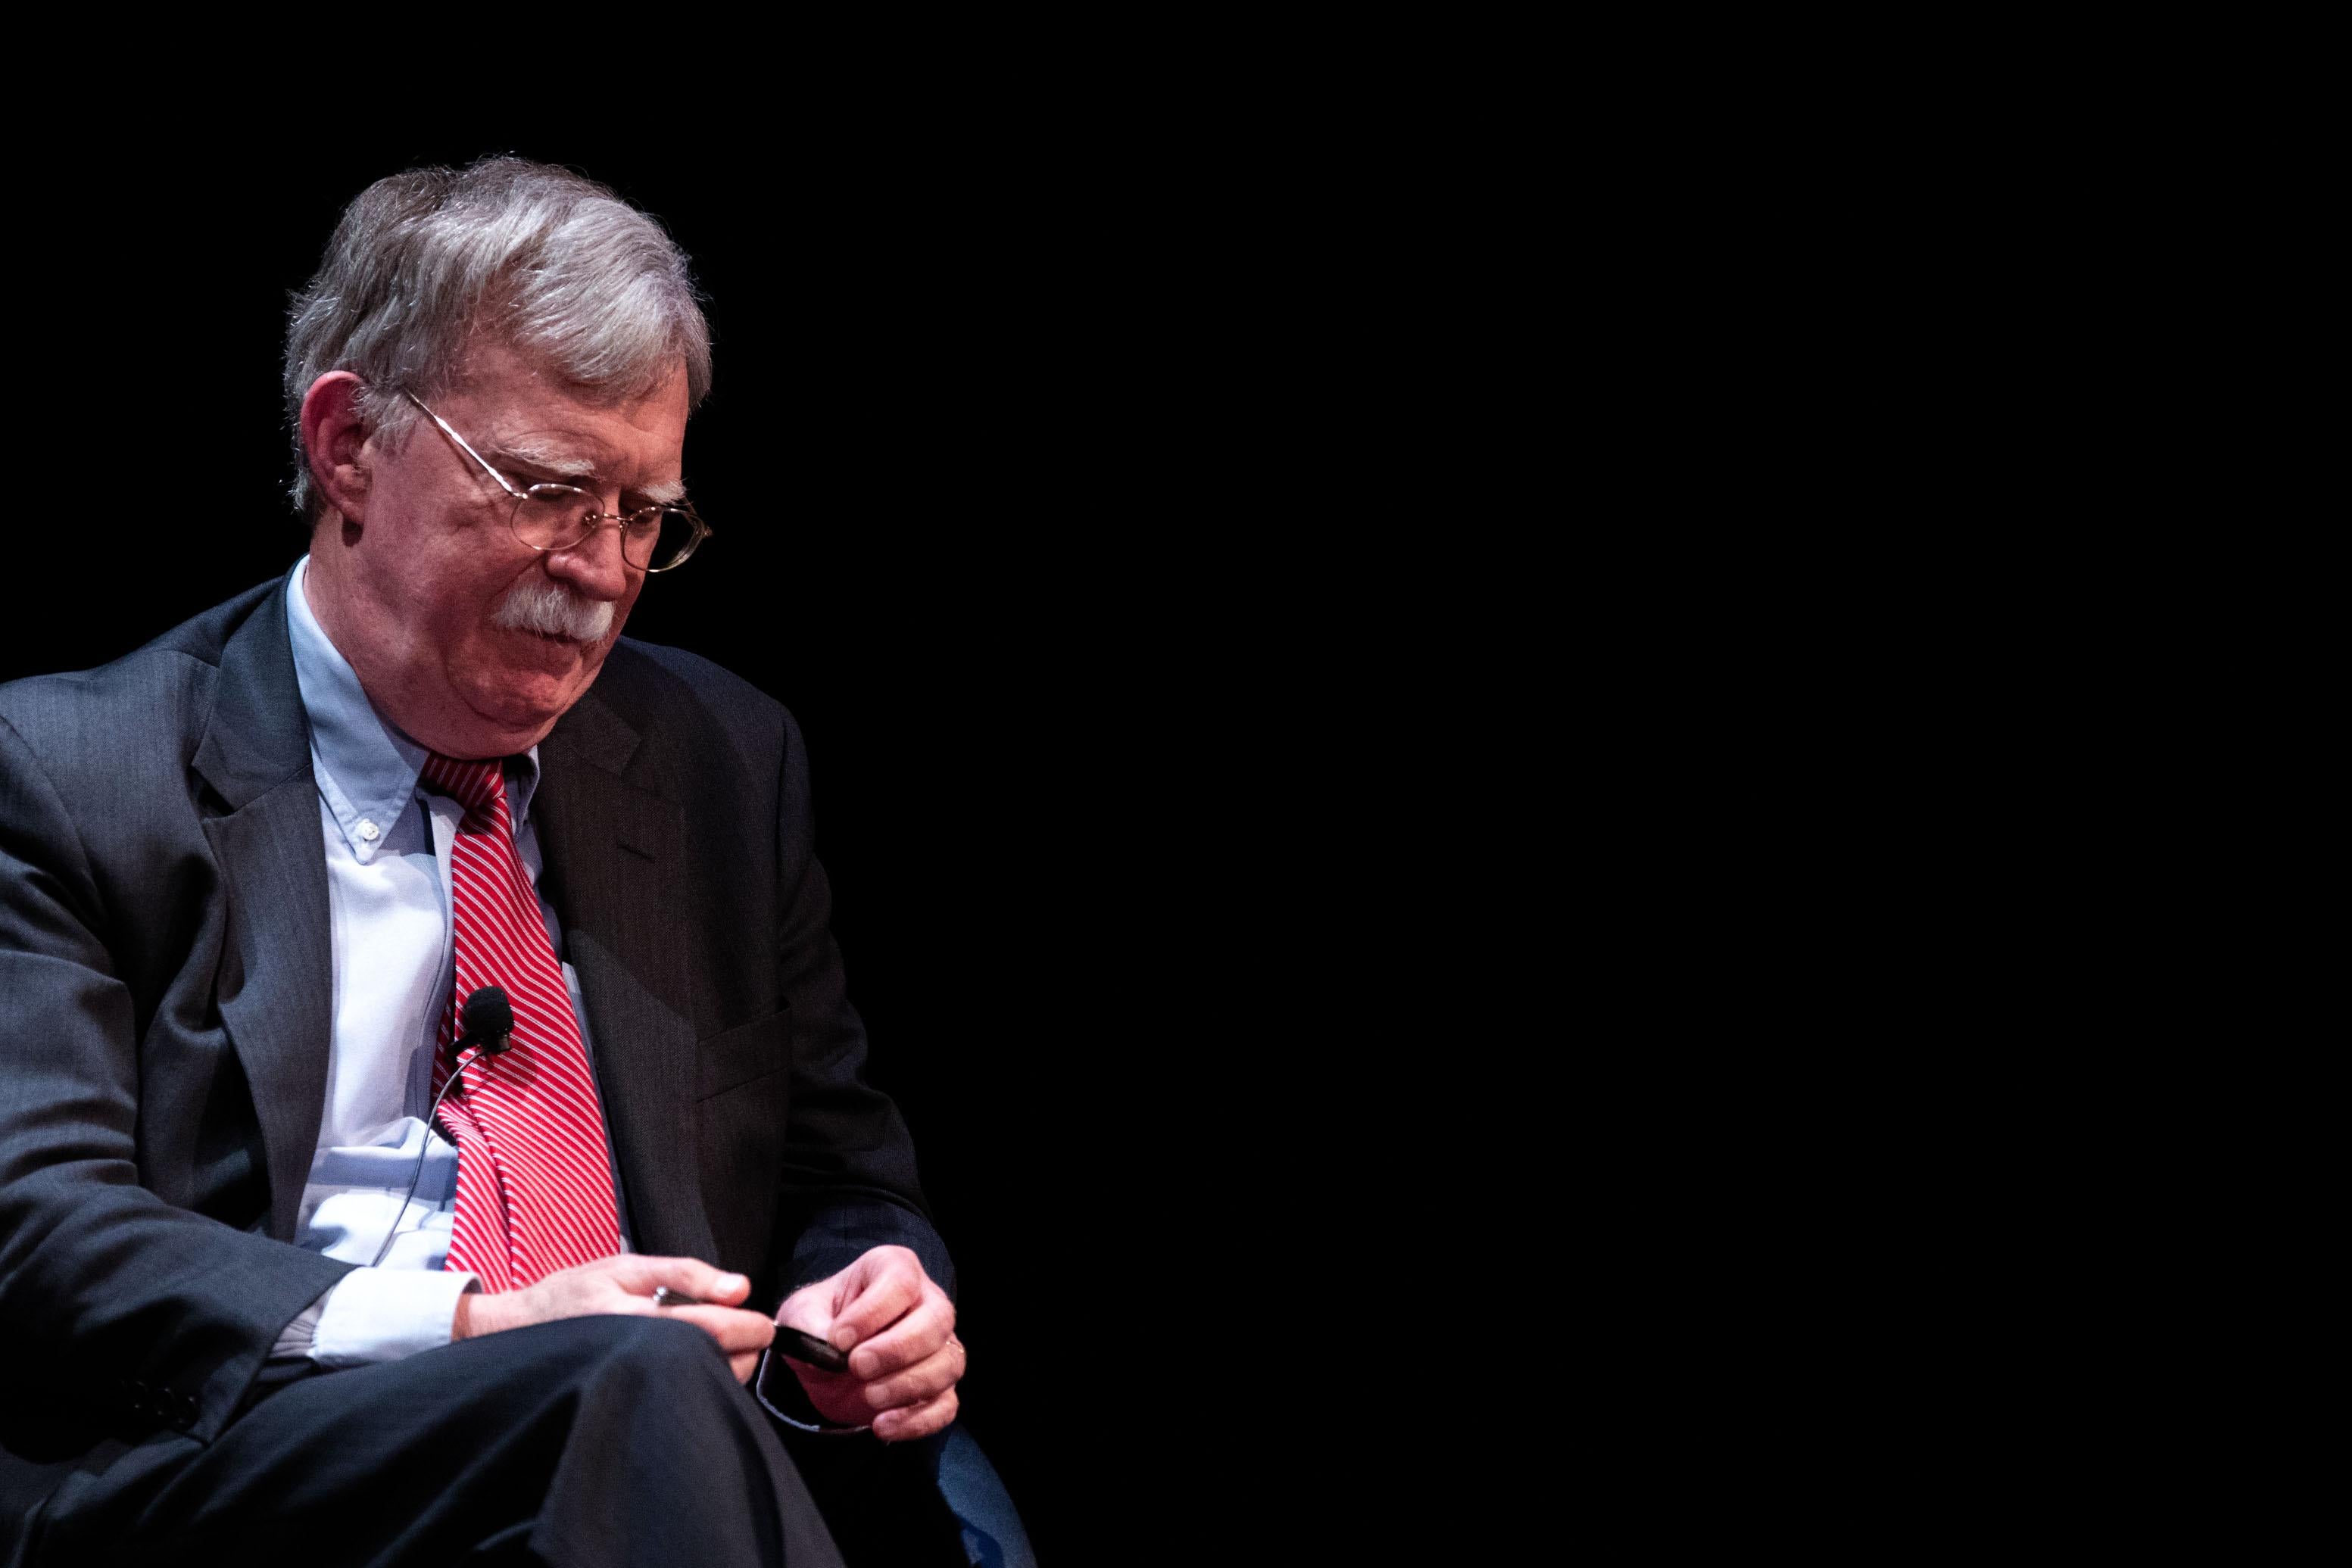 Former National Security adviser John Bolton speaks on stage during a public discussion at Duke University in Durham, North Carolina on February 17, 2020.